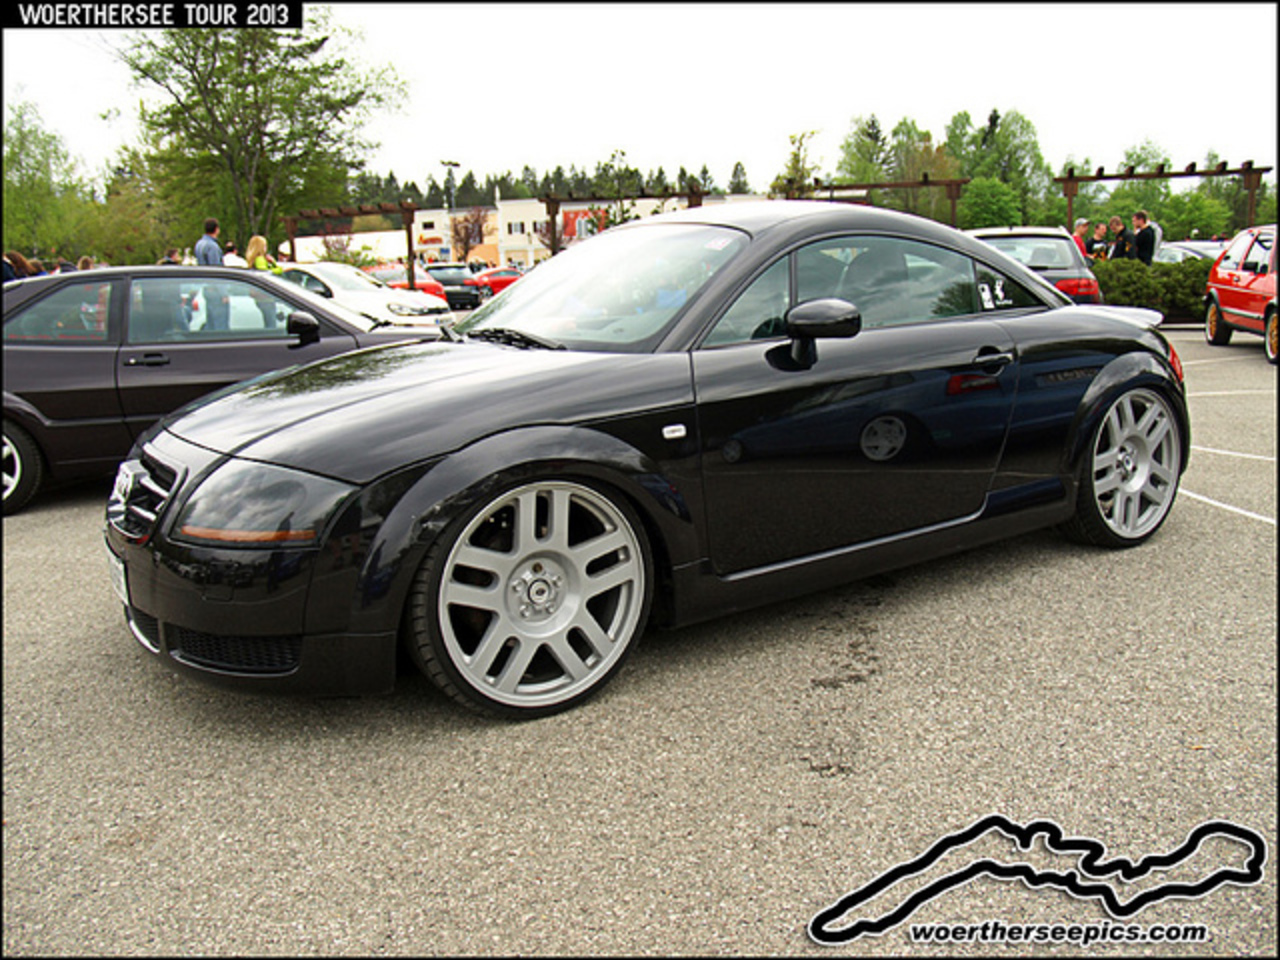 Black Audi TT on Dodge Nitro wheels at the Woerthersee Tour 2013 ...